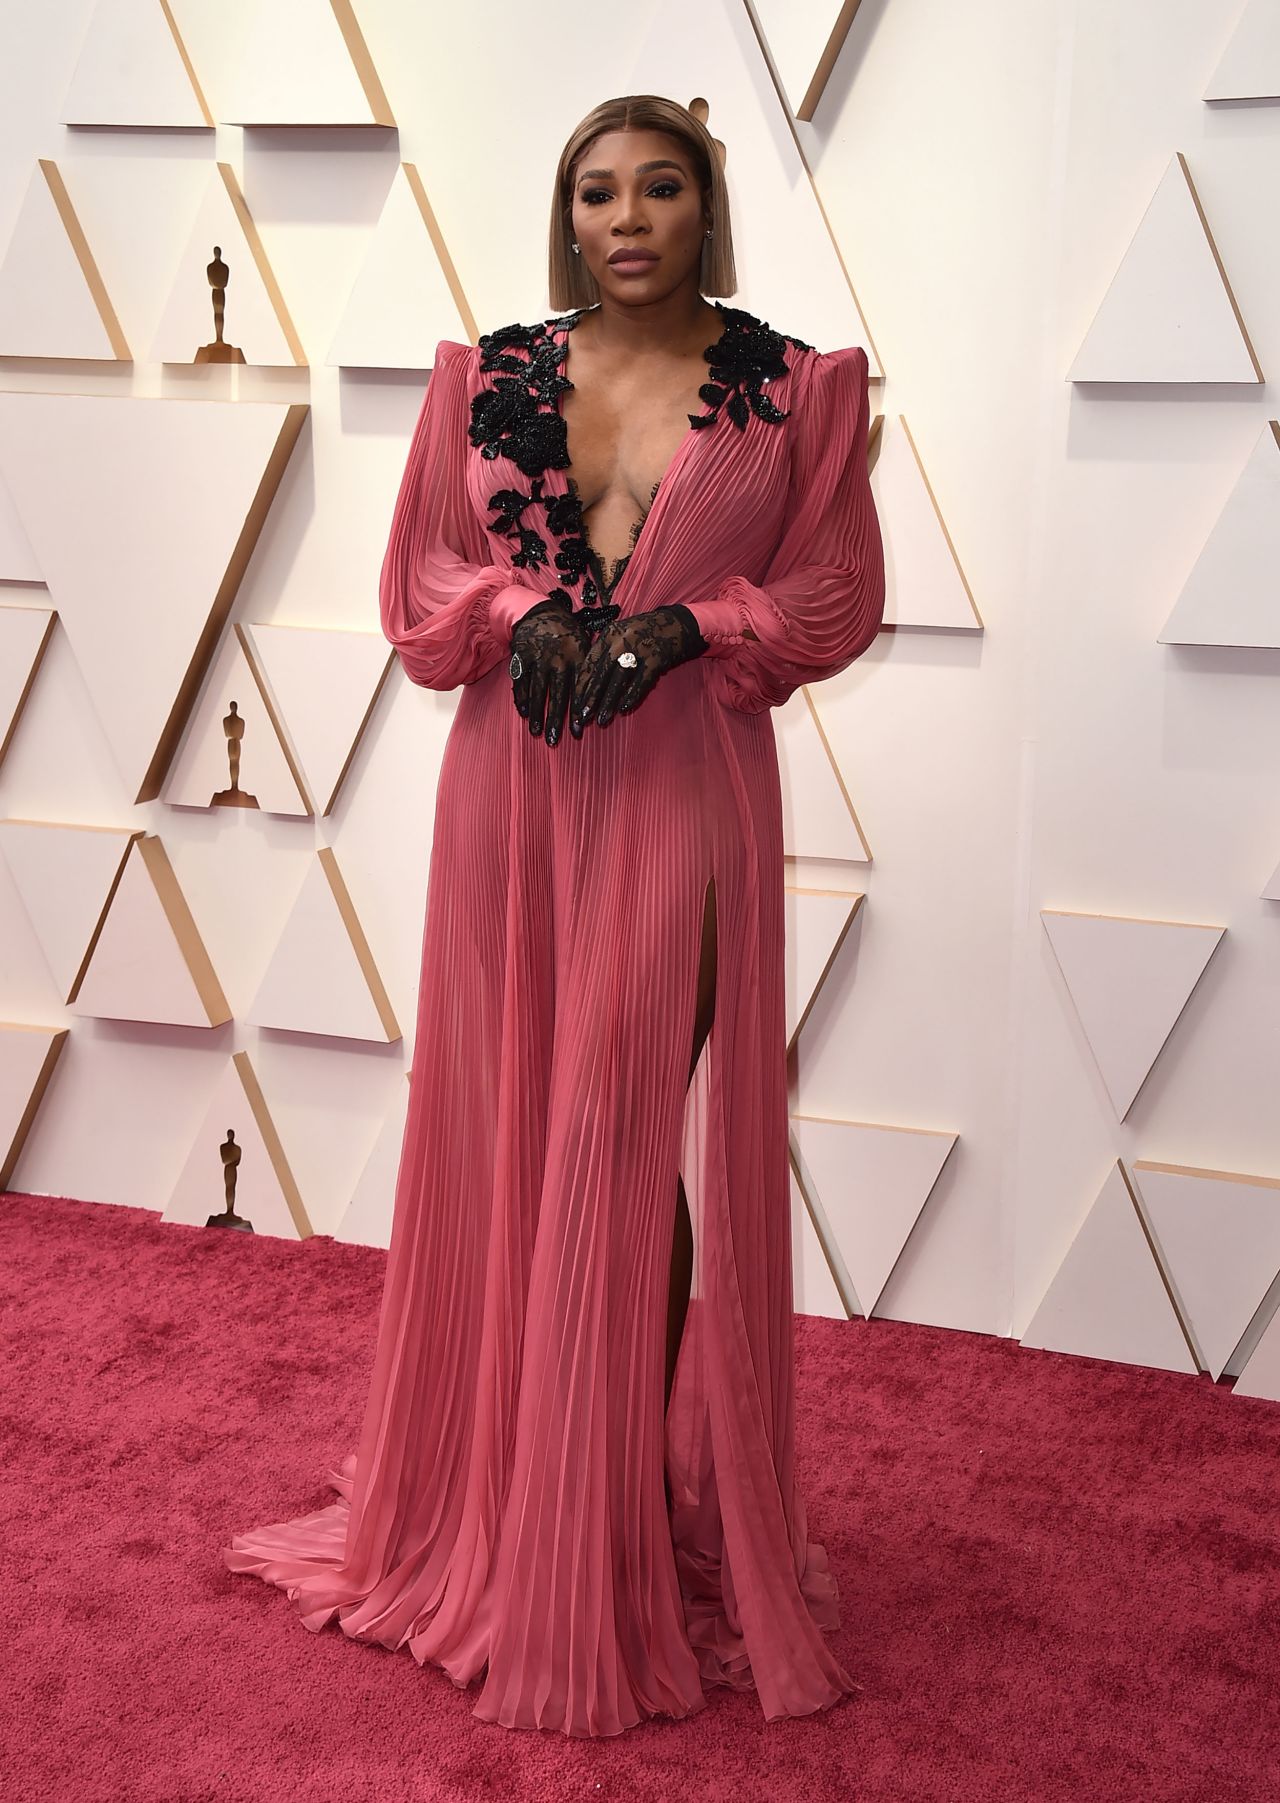 Oscars presenter Serena Williams, co-executive producer of "King Richard" alongside Venus Williams, paired black lace gloves with a flowing Gucci look.  